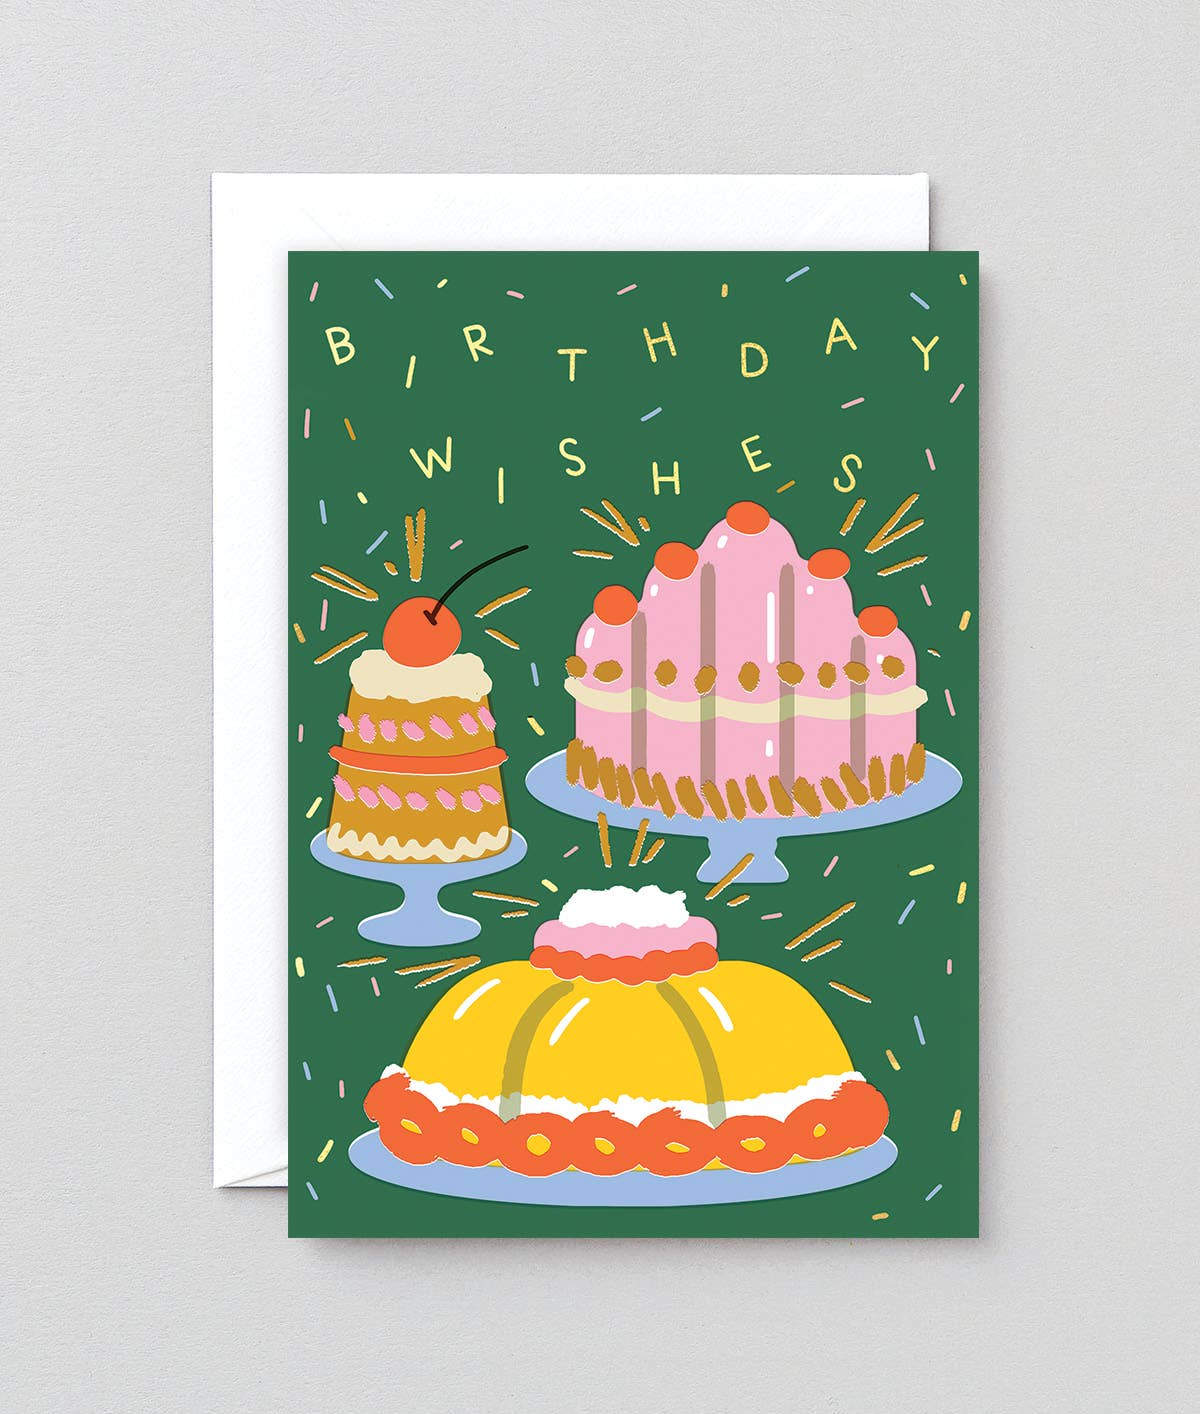 Wrap Cards - Bday Wishes Cakes - Moon Room Shop and Wellness